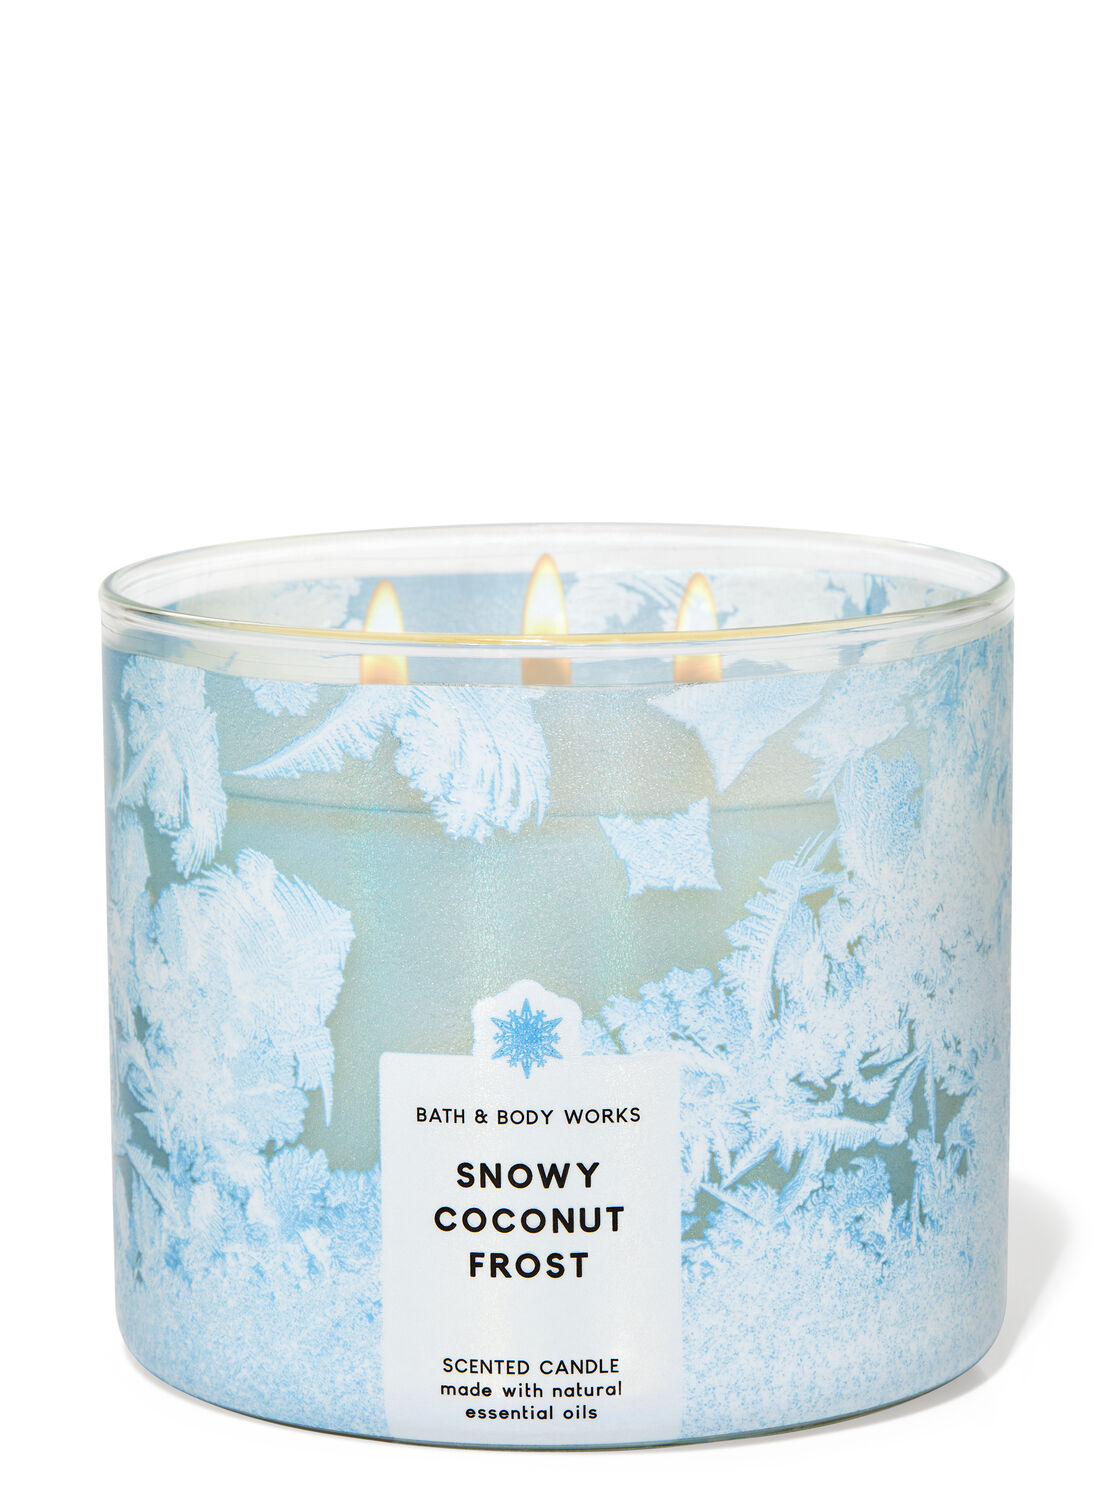 Snowy Coconut Frost 3-Wick Candle